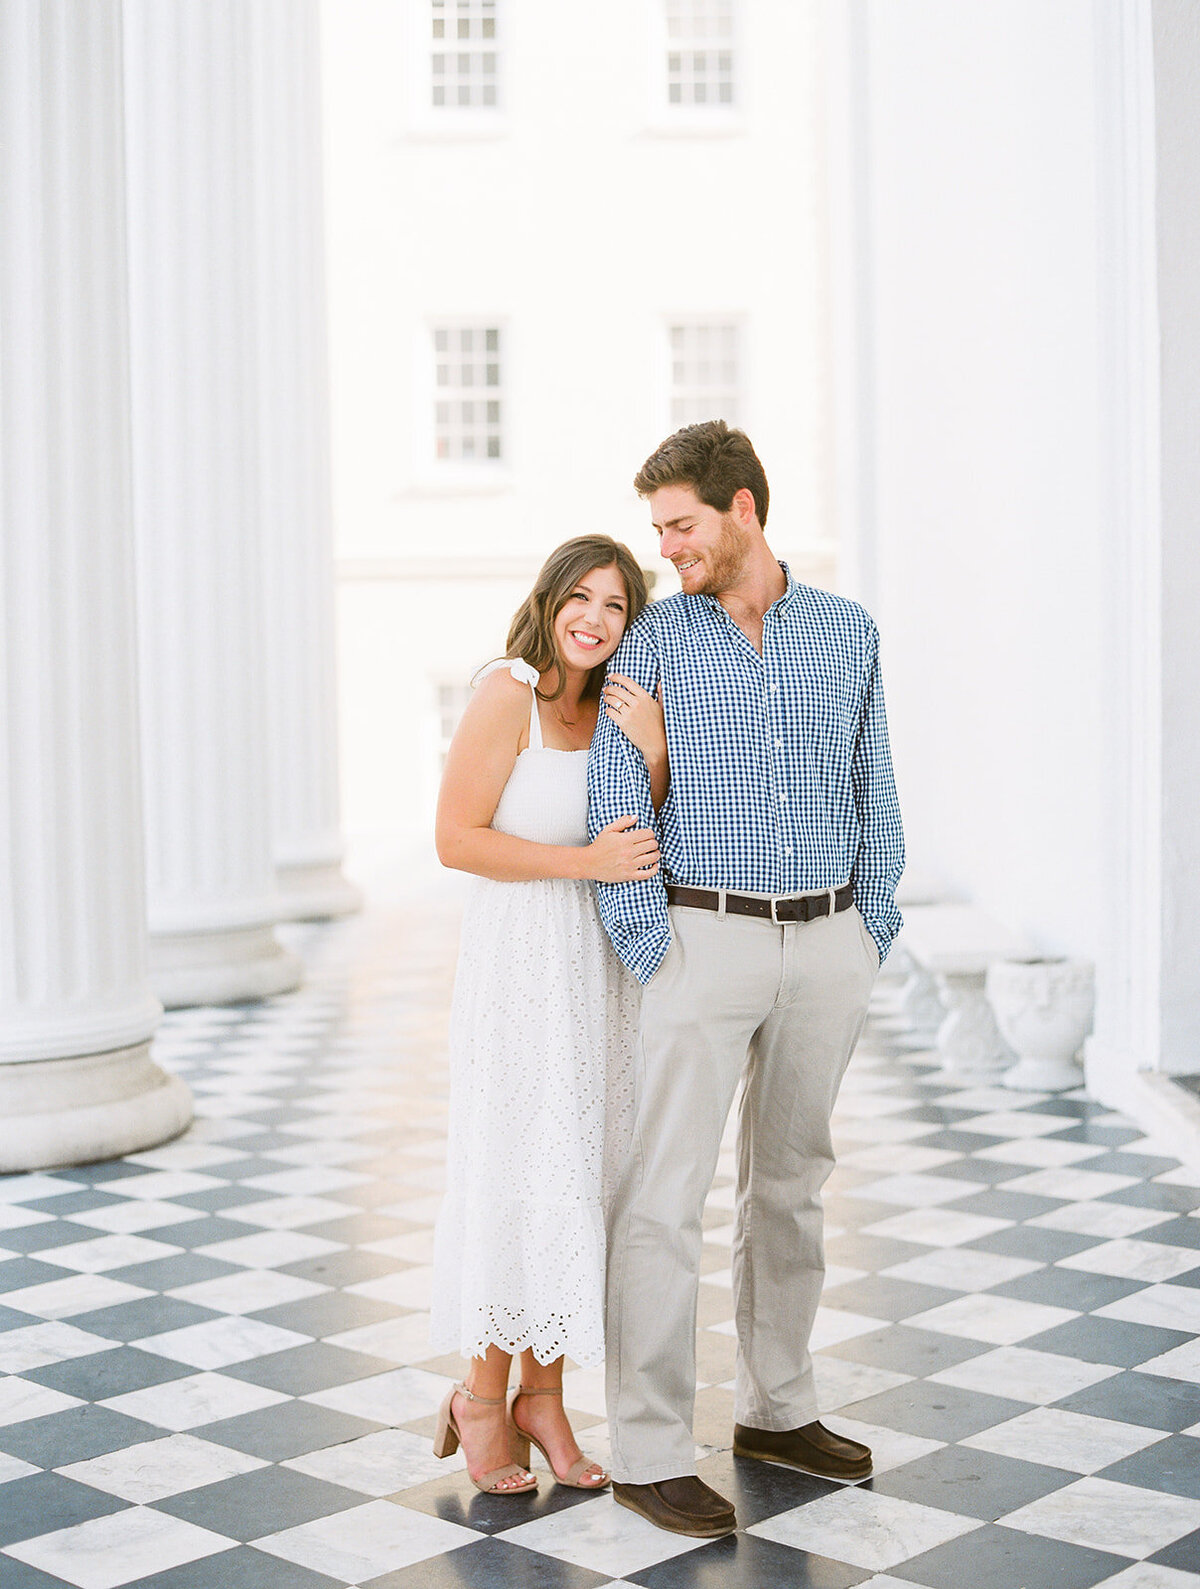 FILM-Kelsey Cab-charleston-outdoor-engagement-Kailee-DiMeglio-Photography-003_websize